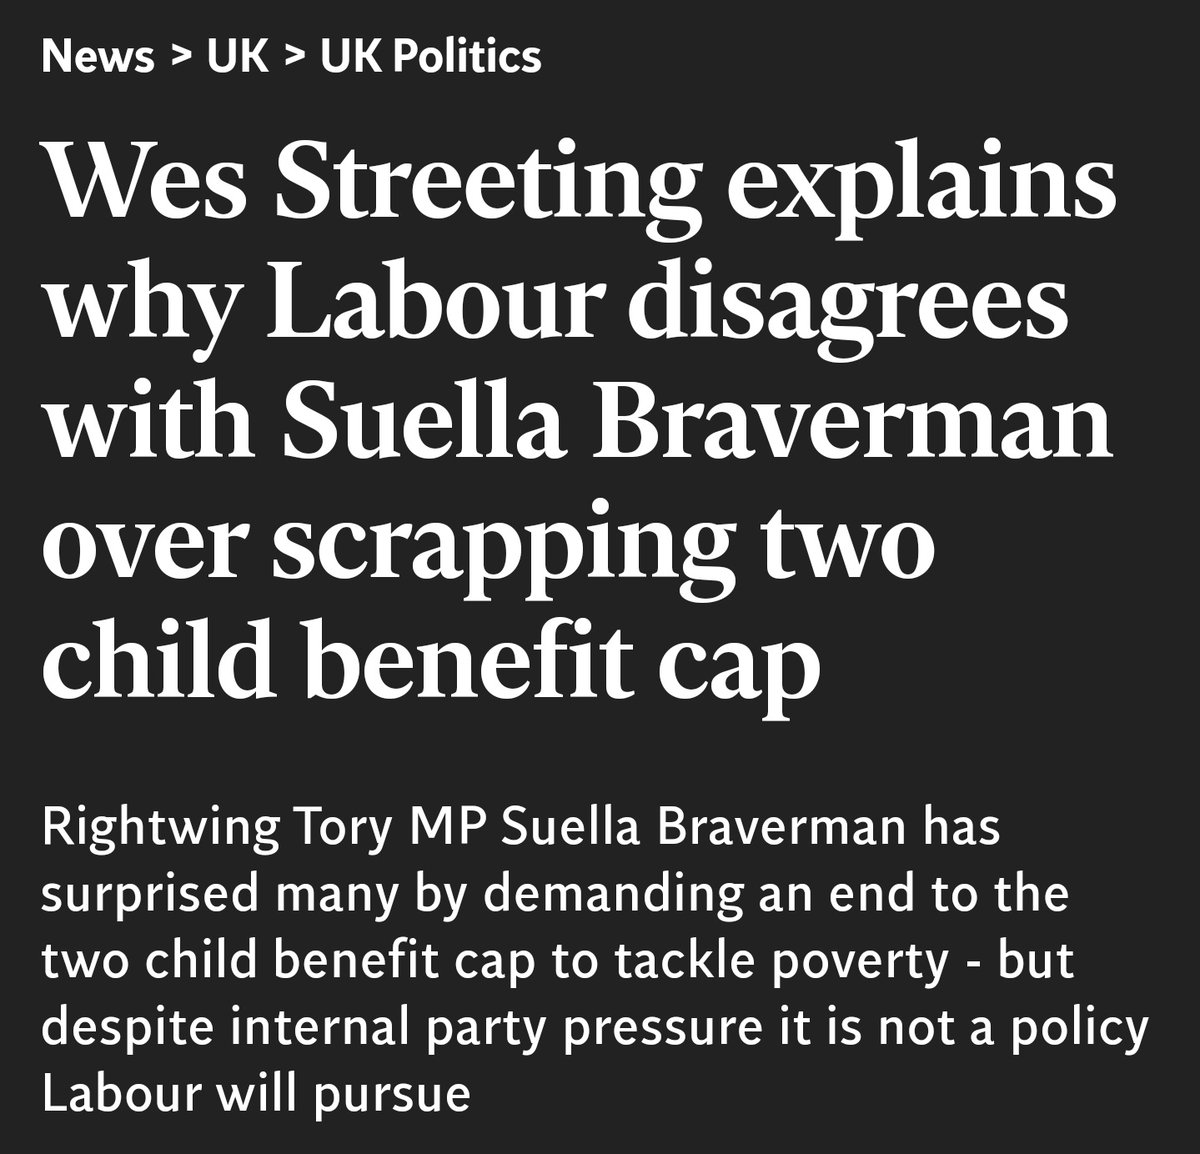 This is the level of monster Wes Streeting is. Being more of a monster than Suella Braverman takes a lot of doing. What an evil little pupsqueak he is...